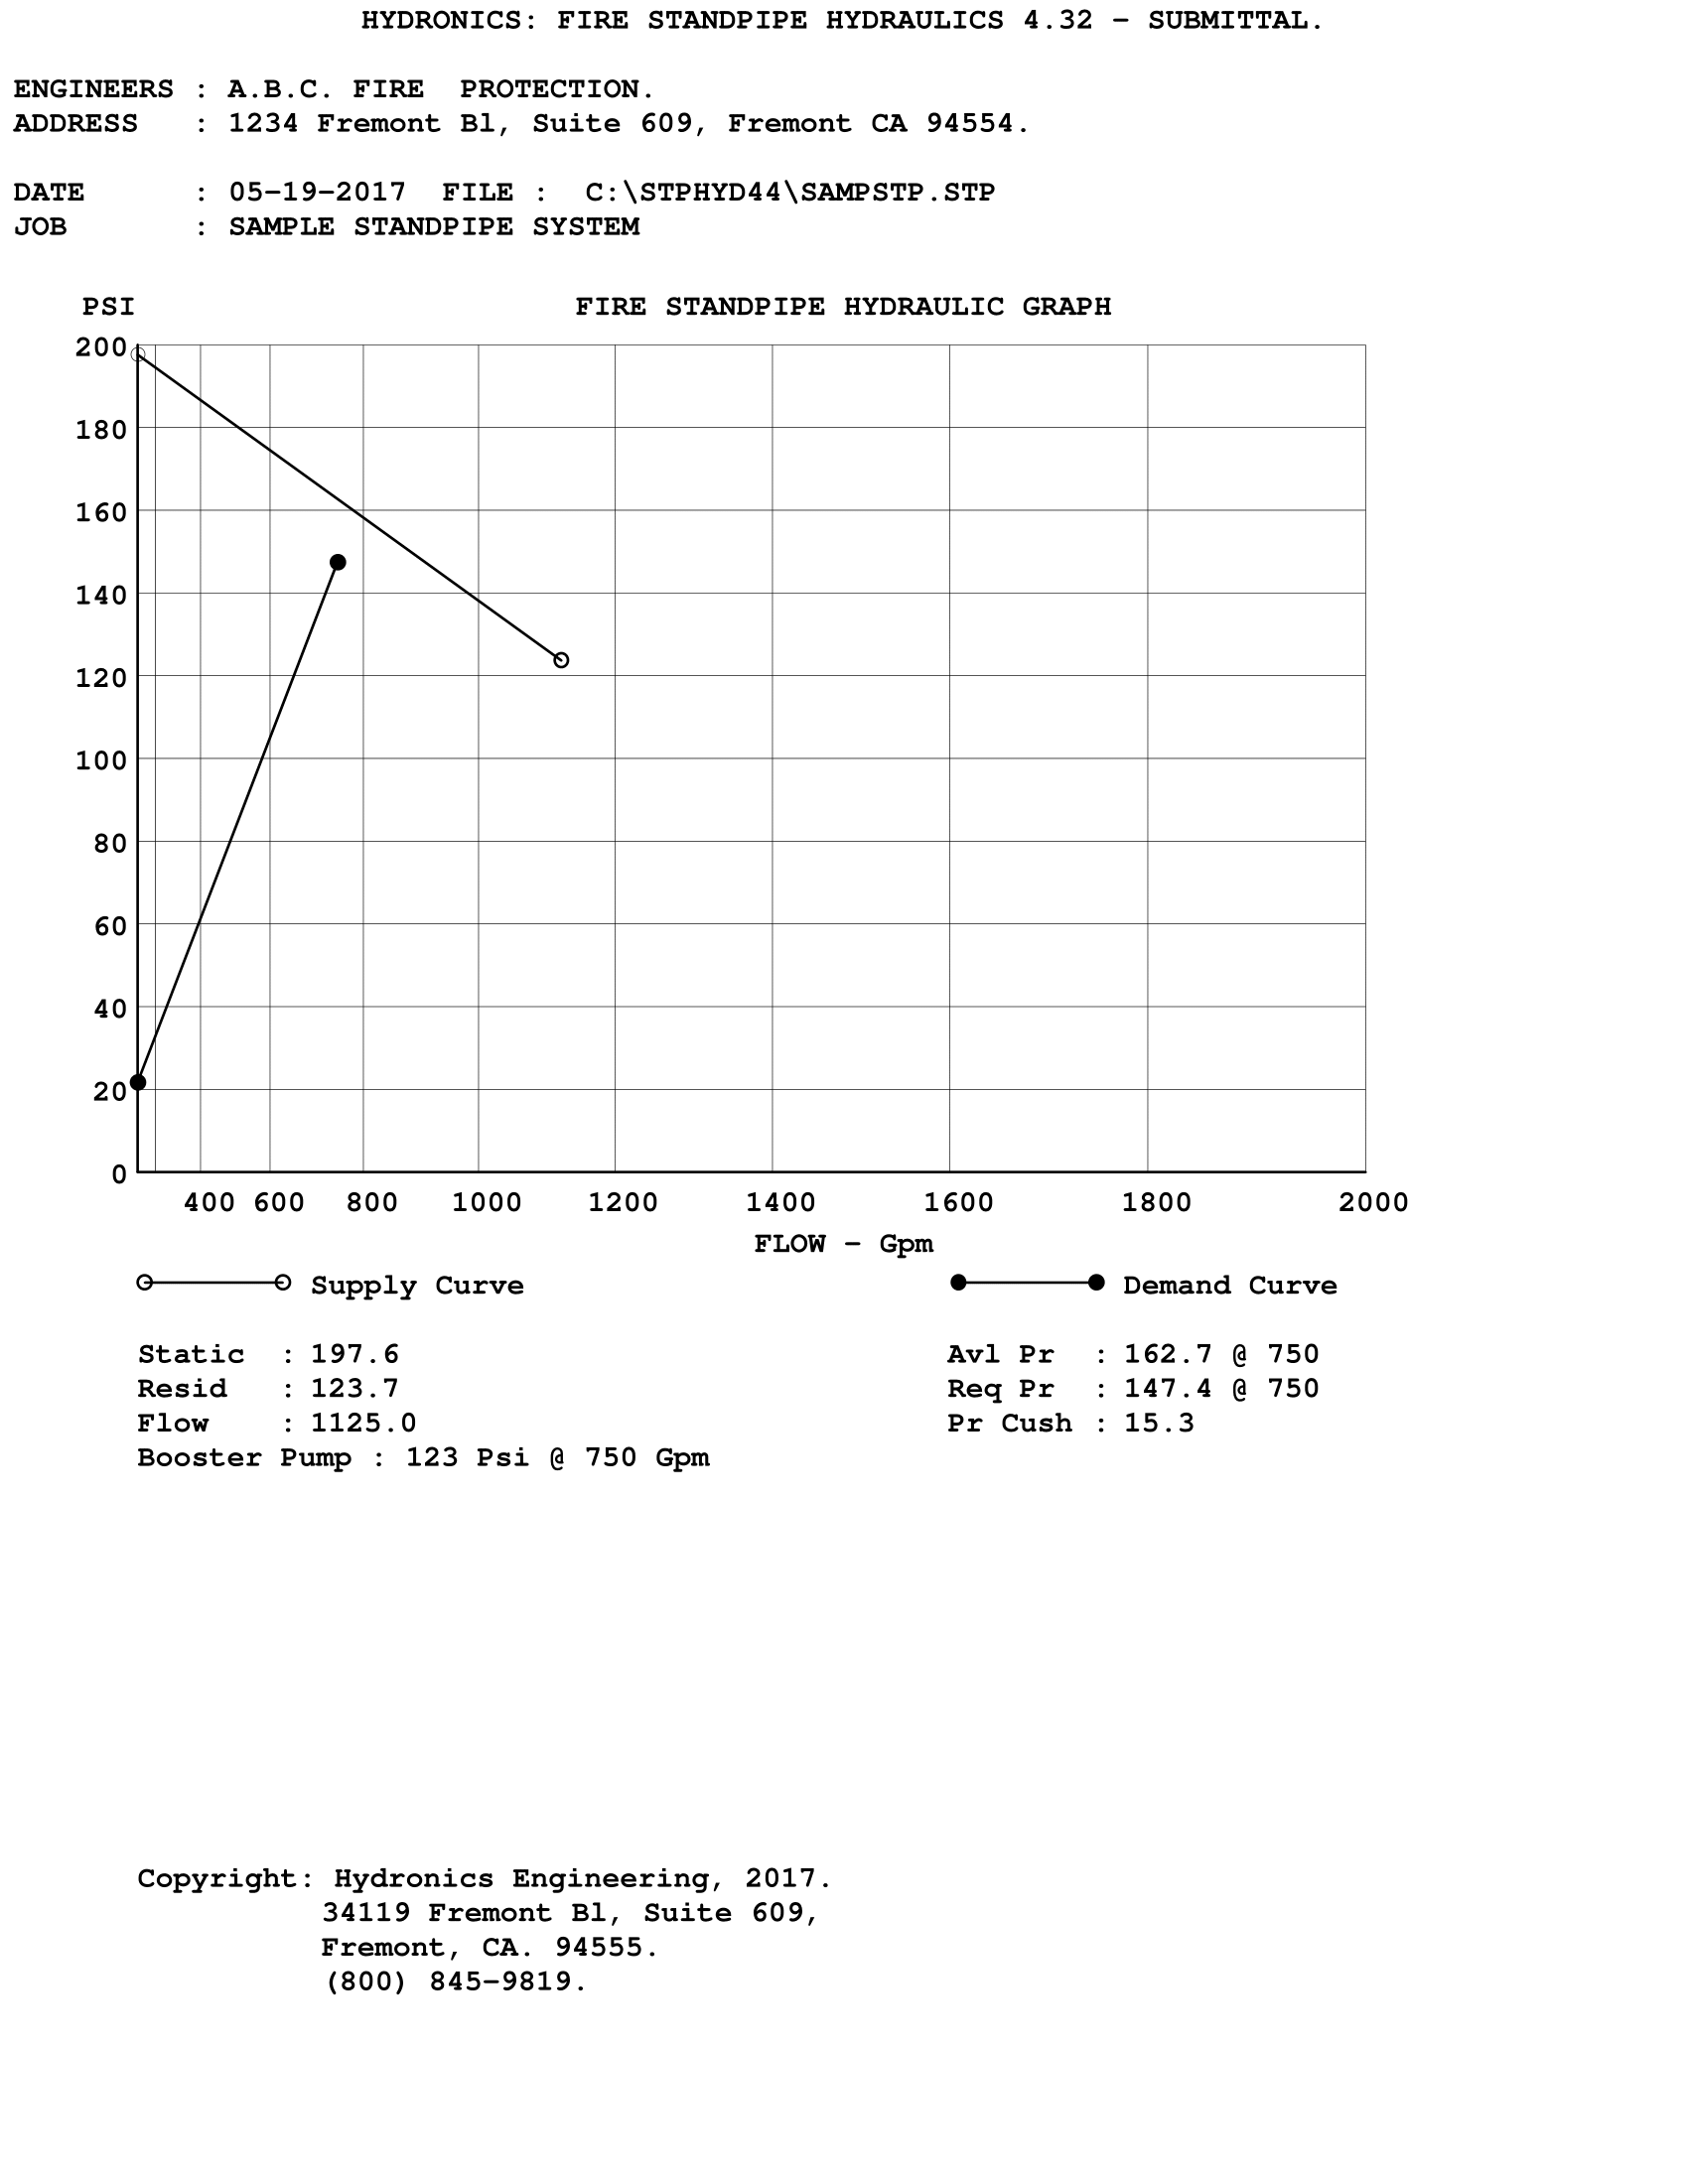 Submittal Graph